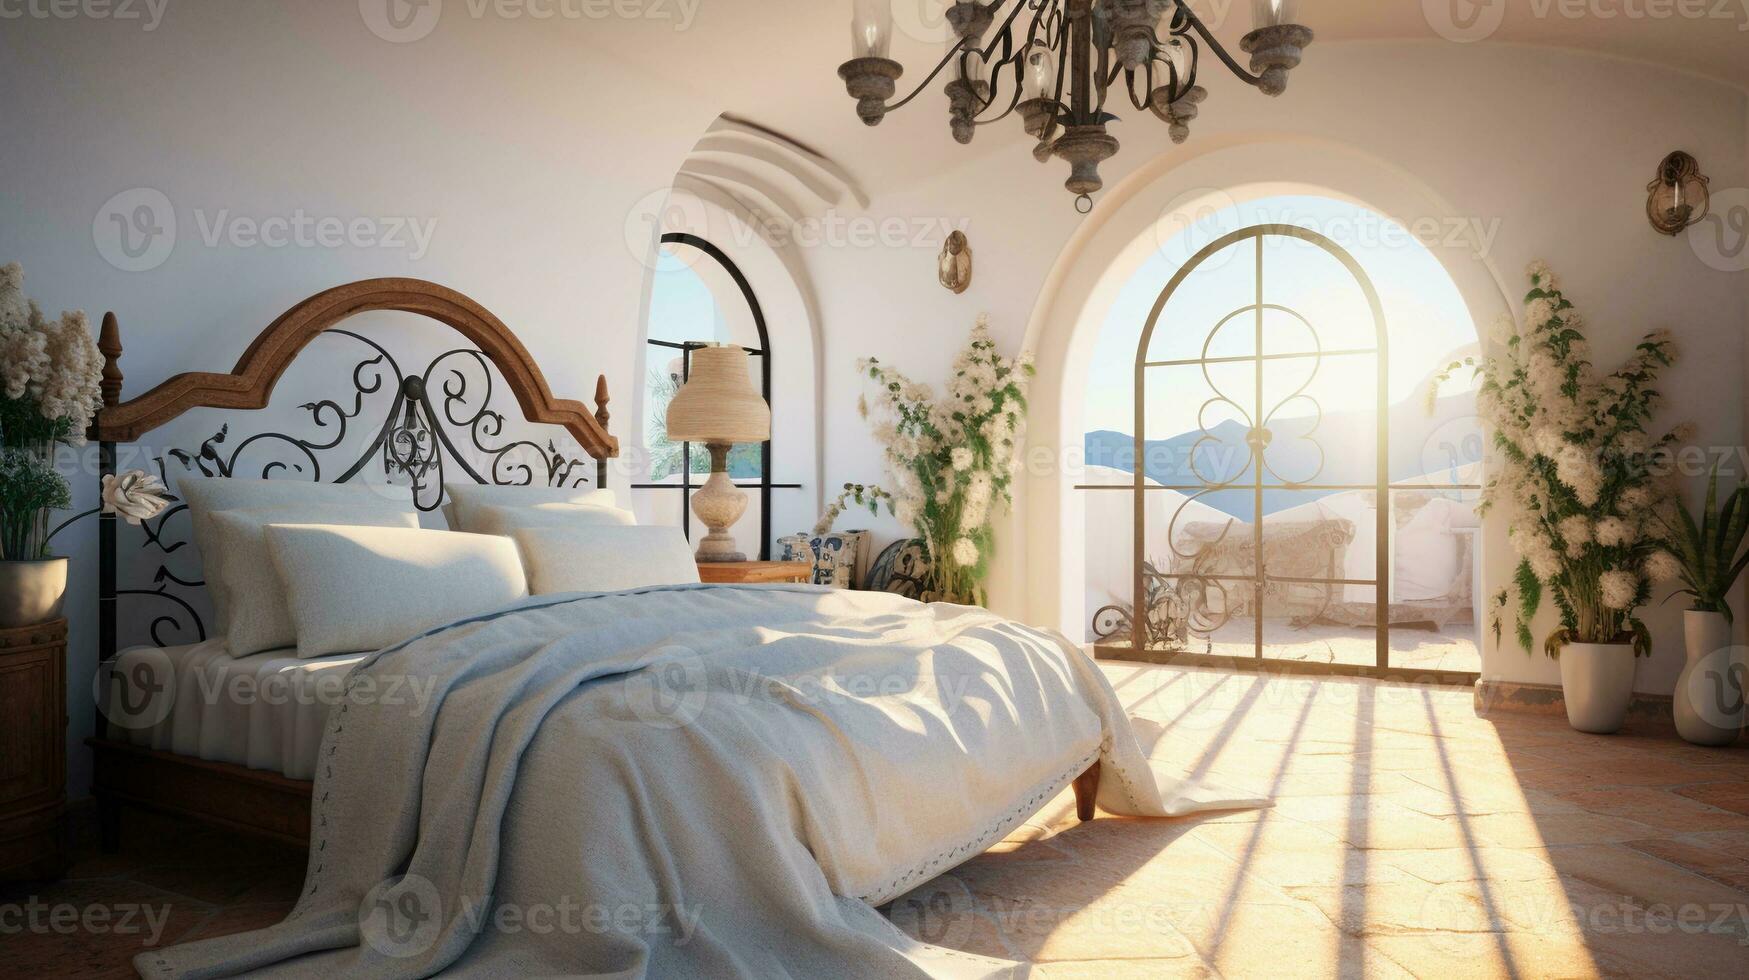 A tranquil scene capturing the essence of a Mediterranean-style bedroom, with whitewashed walls, arched doorways, and a wrought iron bed frame, allowing space for text. AI generated photo